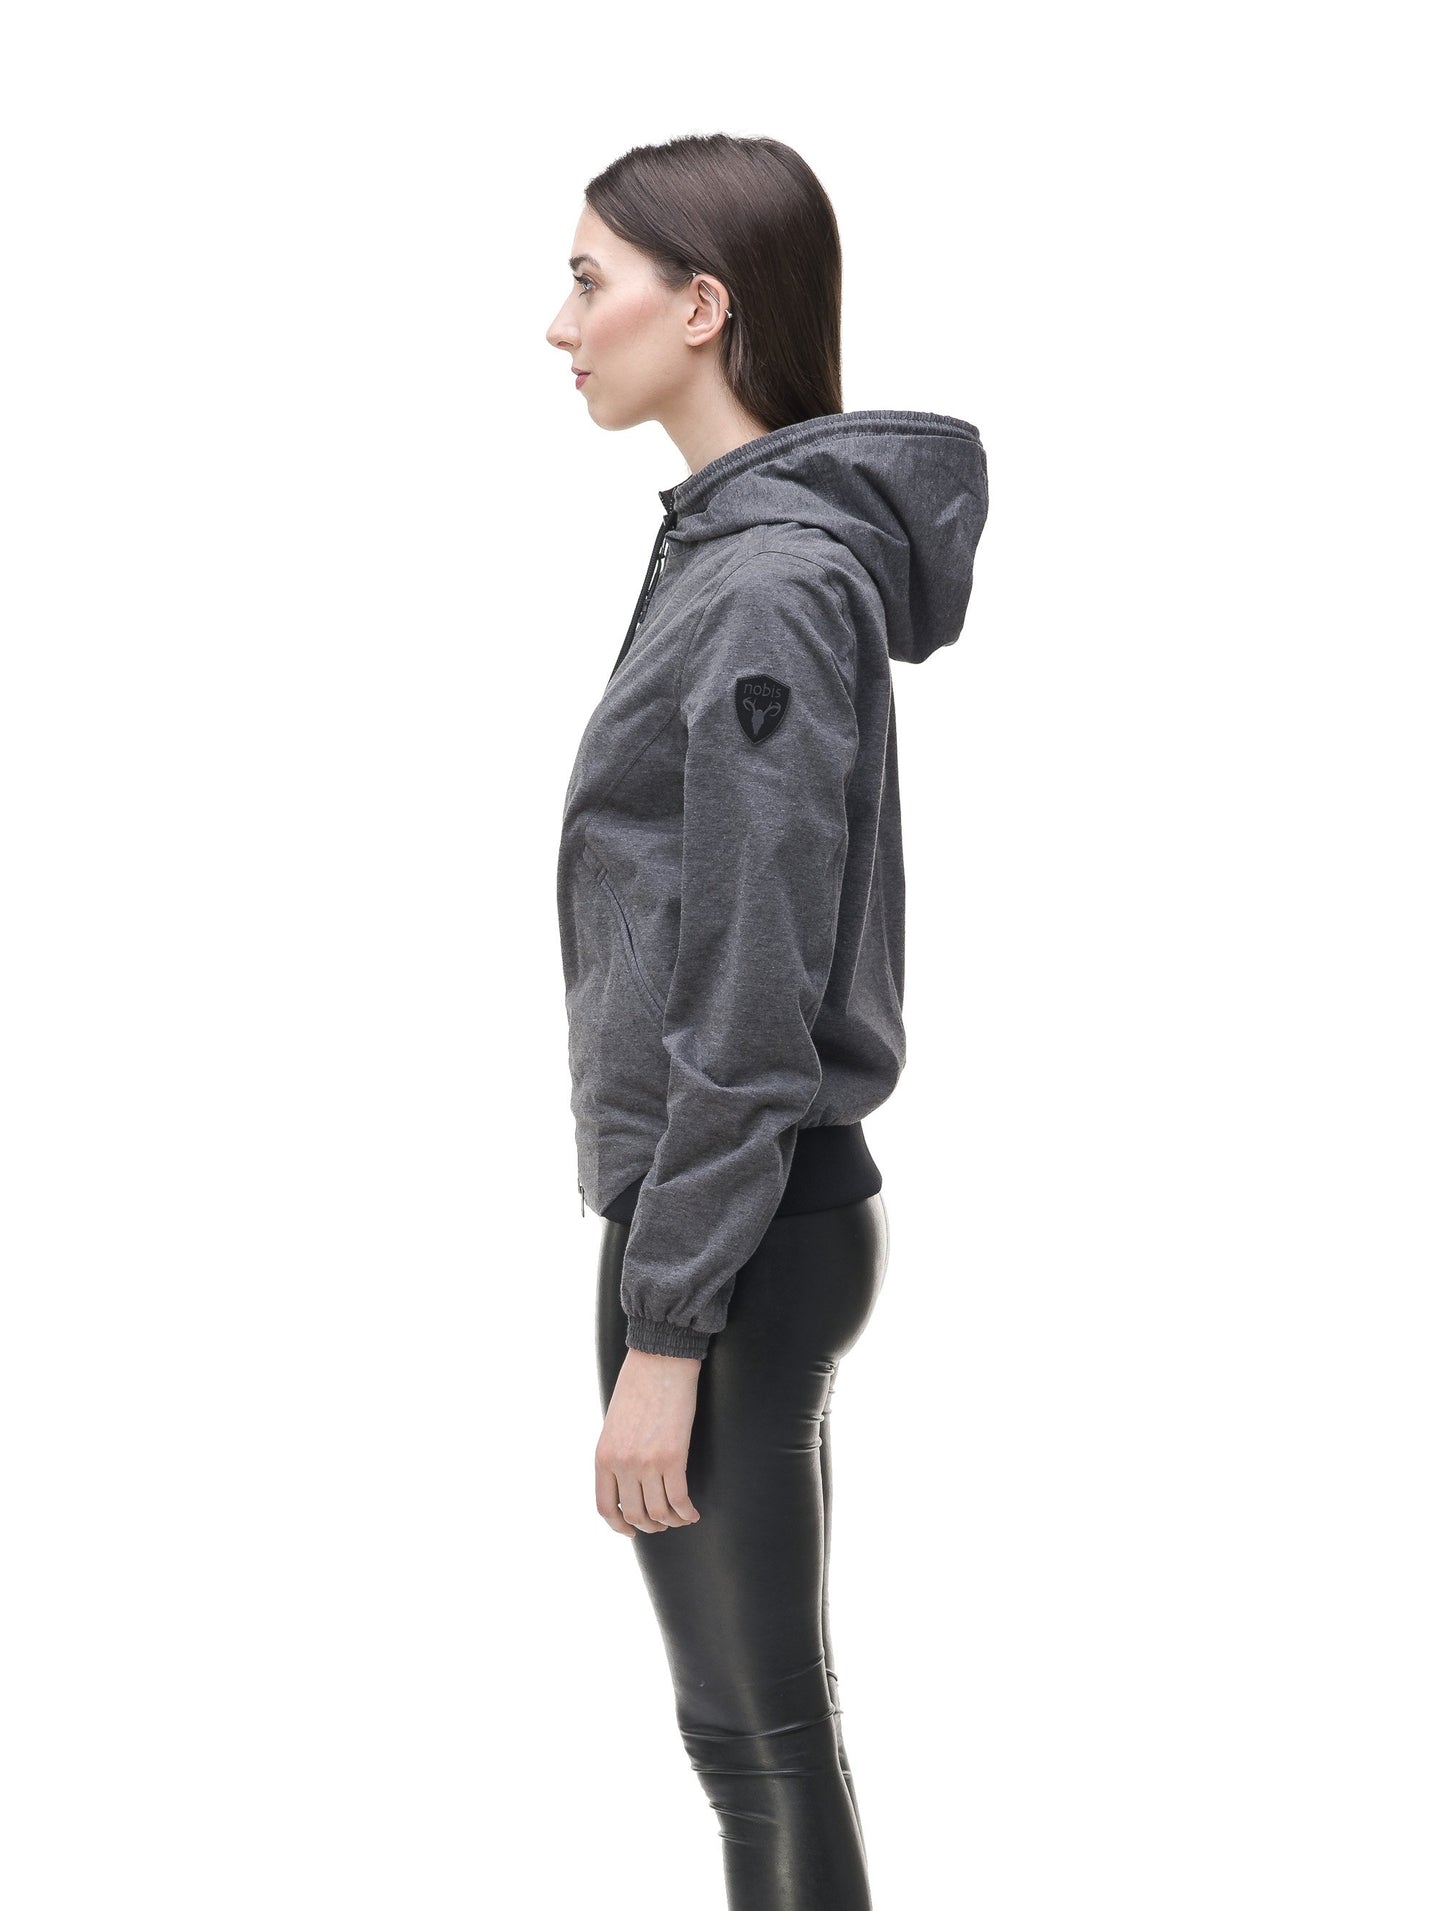 Women's lightweight jersey down filled jacket in Charcoal, or Black